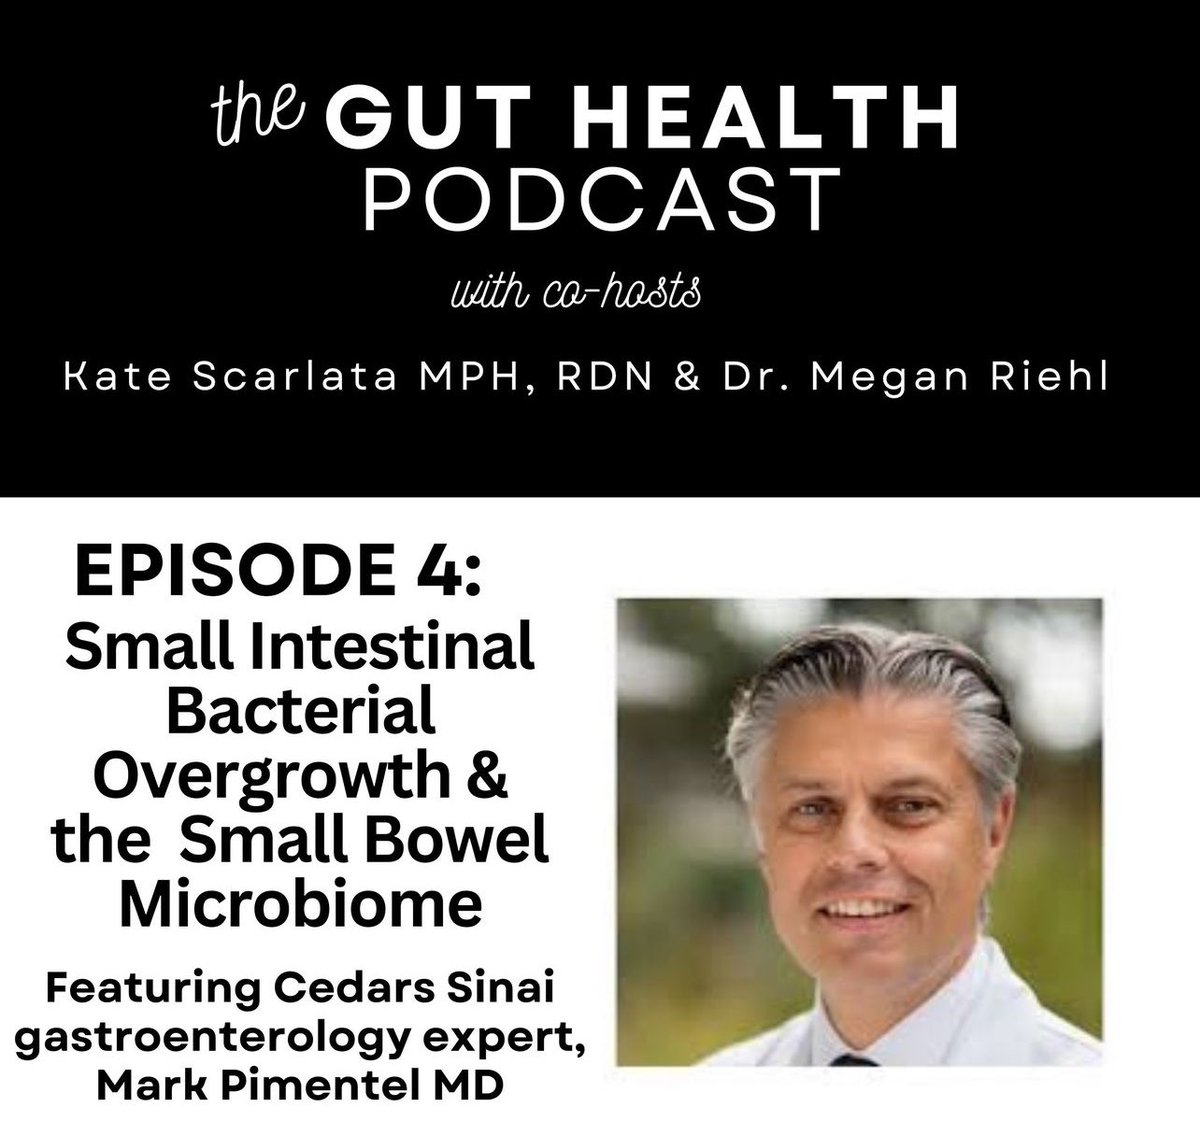 @KateScarlata_RD and I are excited about Ep4! Got excess intestinal gas, bloating and GI distress? Expand your knowledge on the topic of #SIBO w our guest expert gastroenterologist, Dr. @MarkPimentelMD 🎧 theguthealthpodcast.buzzsprout.com